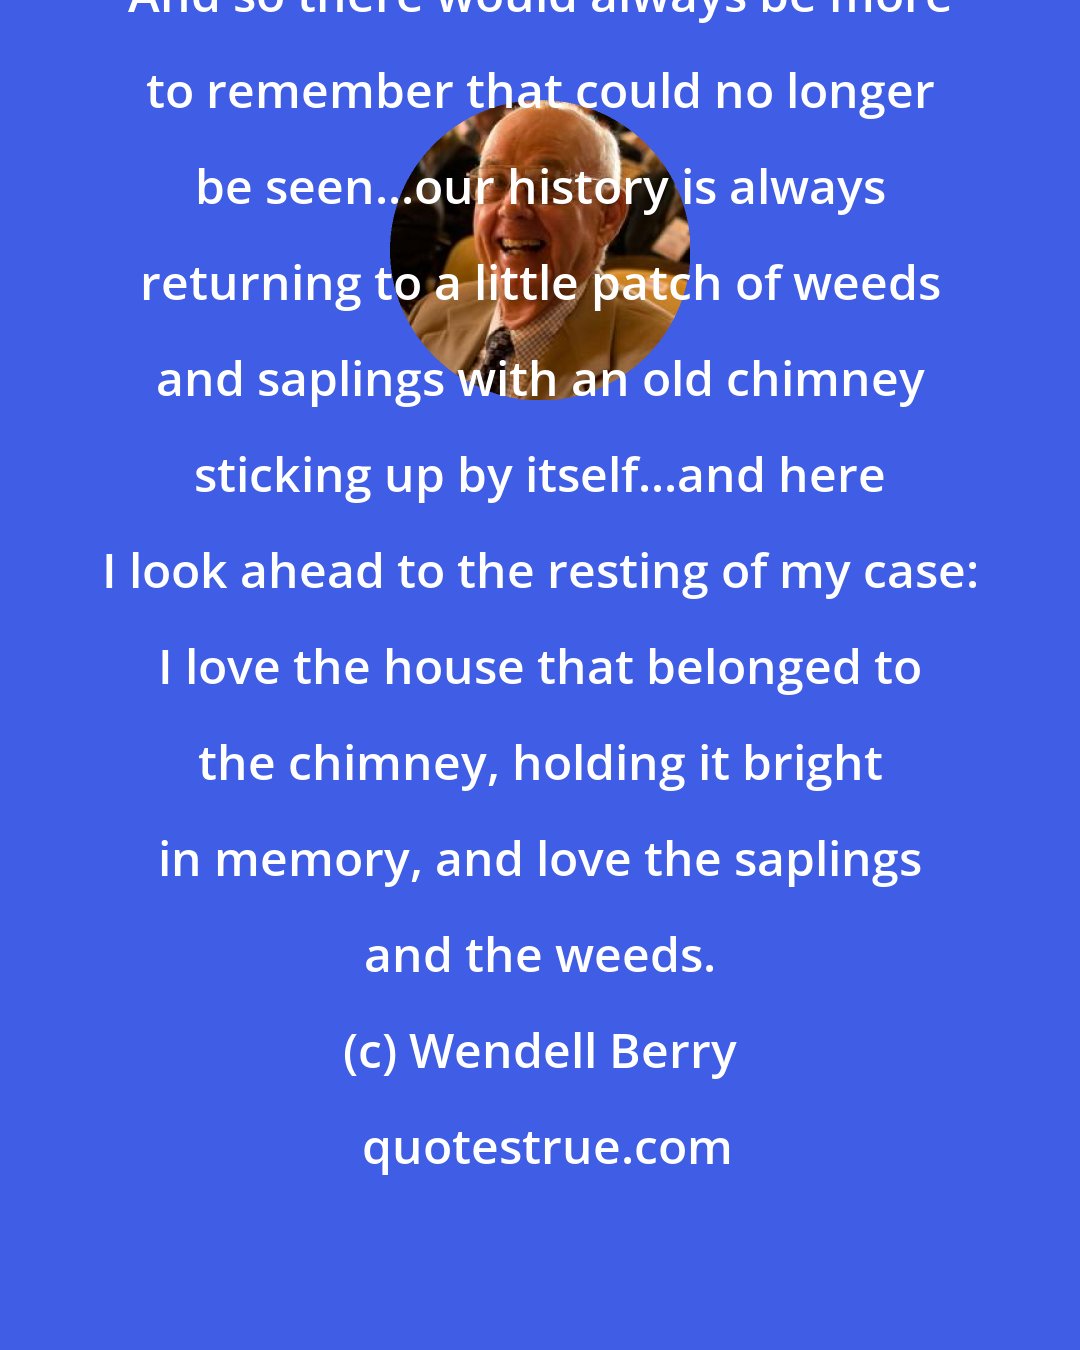 Wendell Berry: And so there would always be more to remember that could no longer be seen...our history is always returning to a little patch of weeds and saplings with an old chimney sticking up by itself...and here I look ahead to the resting of my case: I love the house that belonged to the chimney, holding it bright in memory, and love the saplings and the weeds.